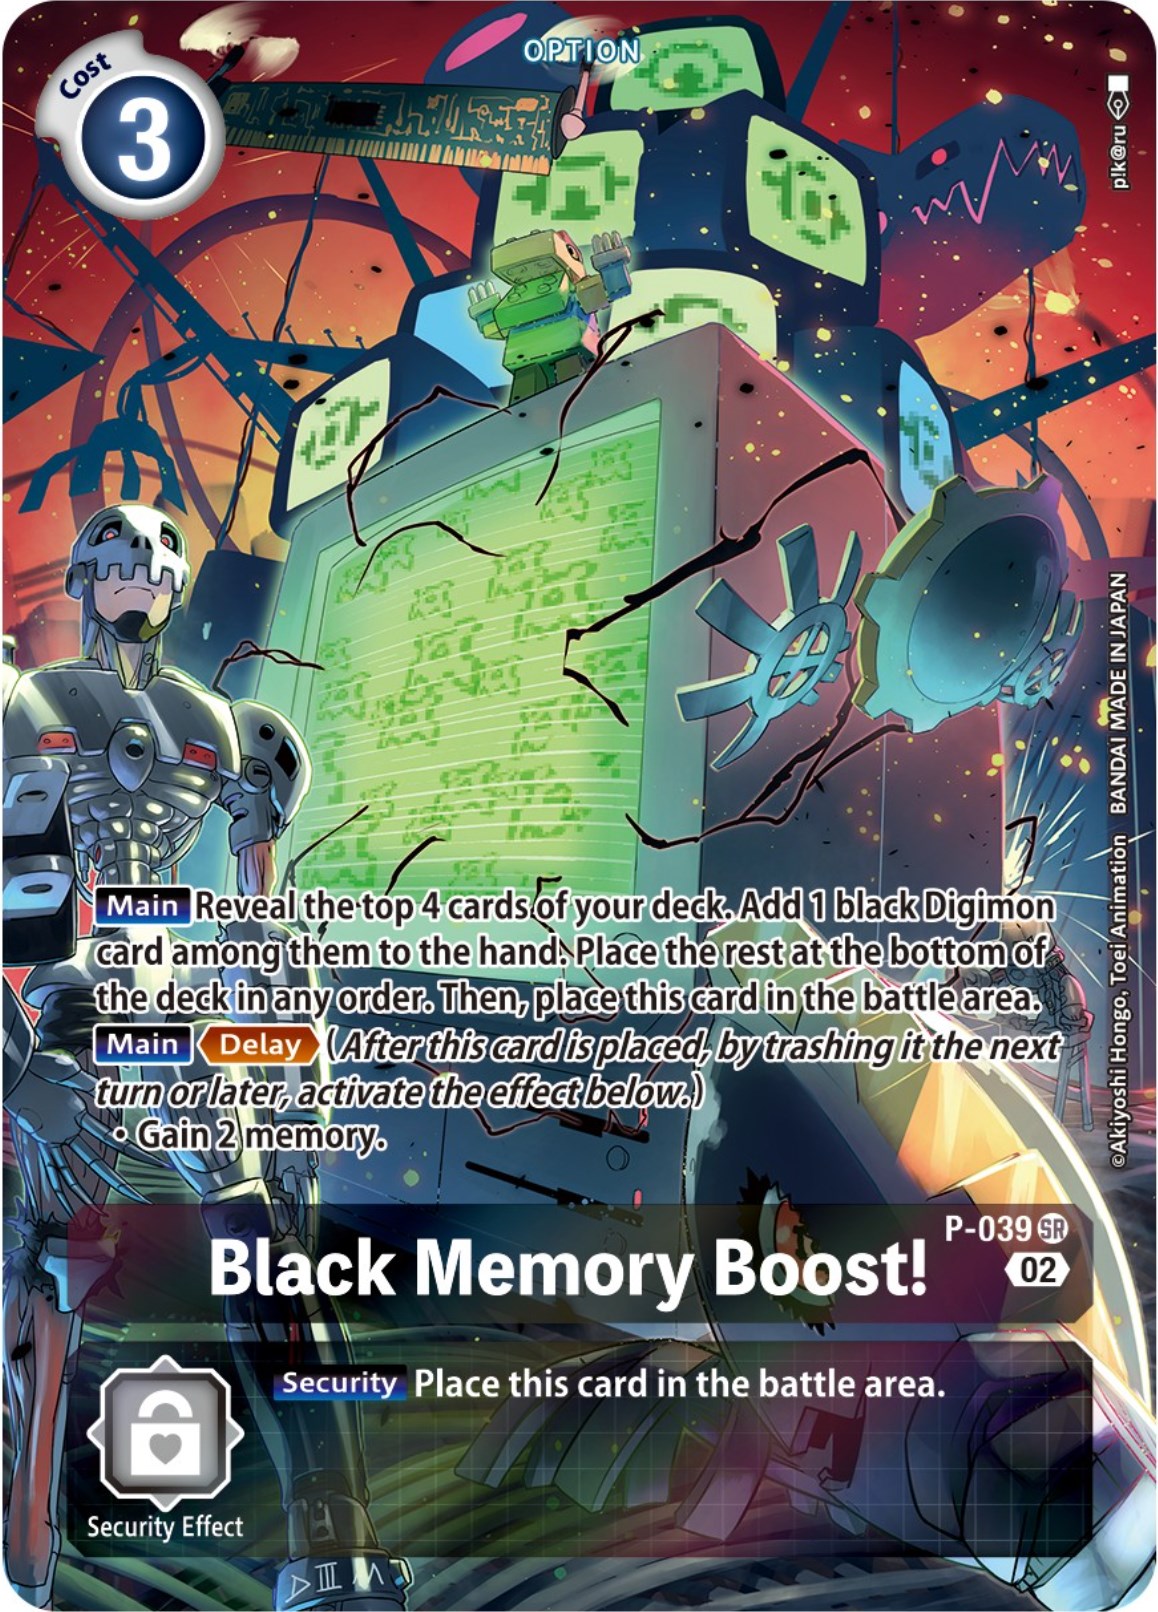 Black Memory Boost! [P-039] (Digimon Adventure Box 2) [Promotional Cards] | Viridian Forest